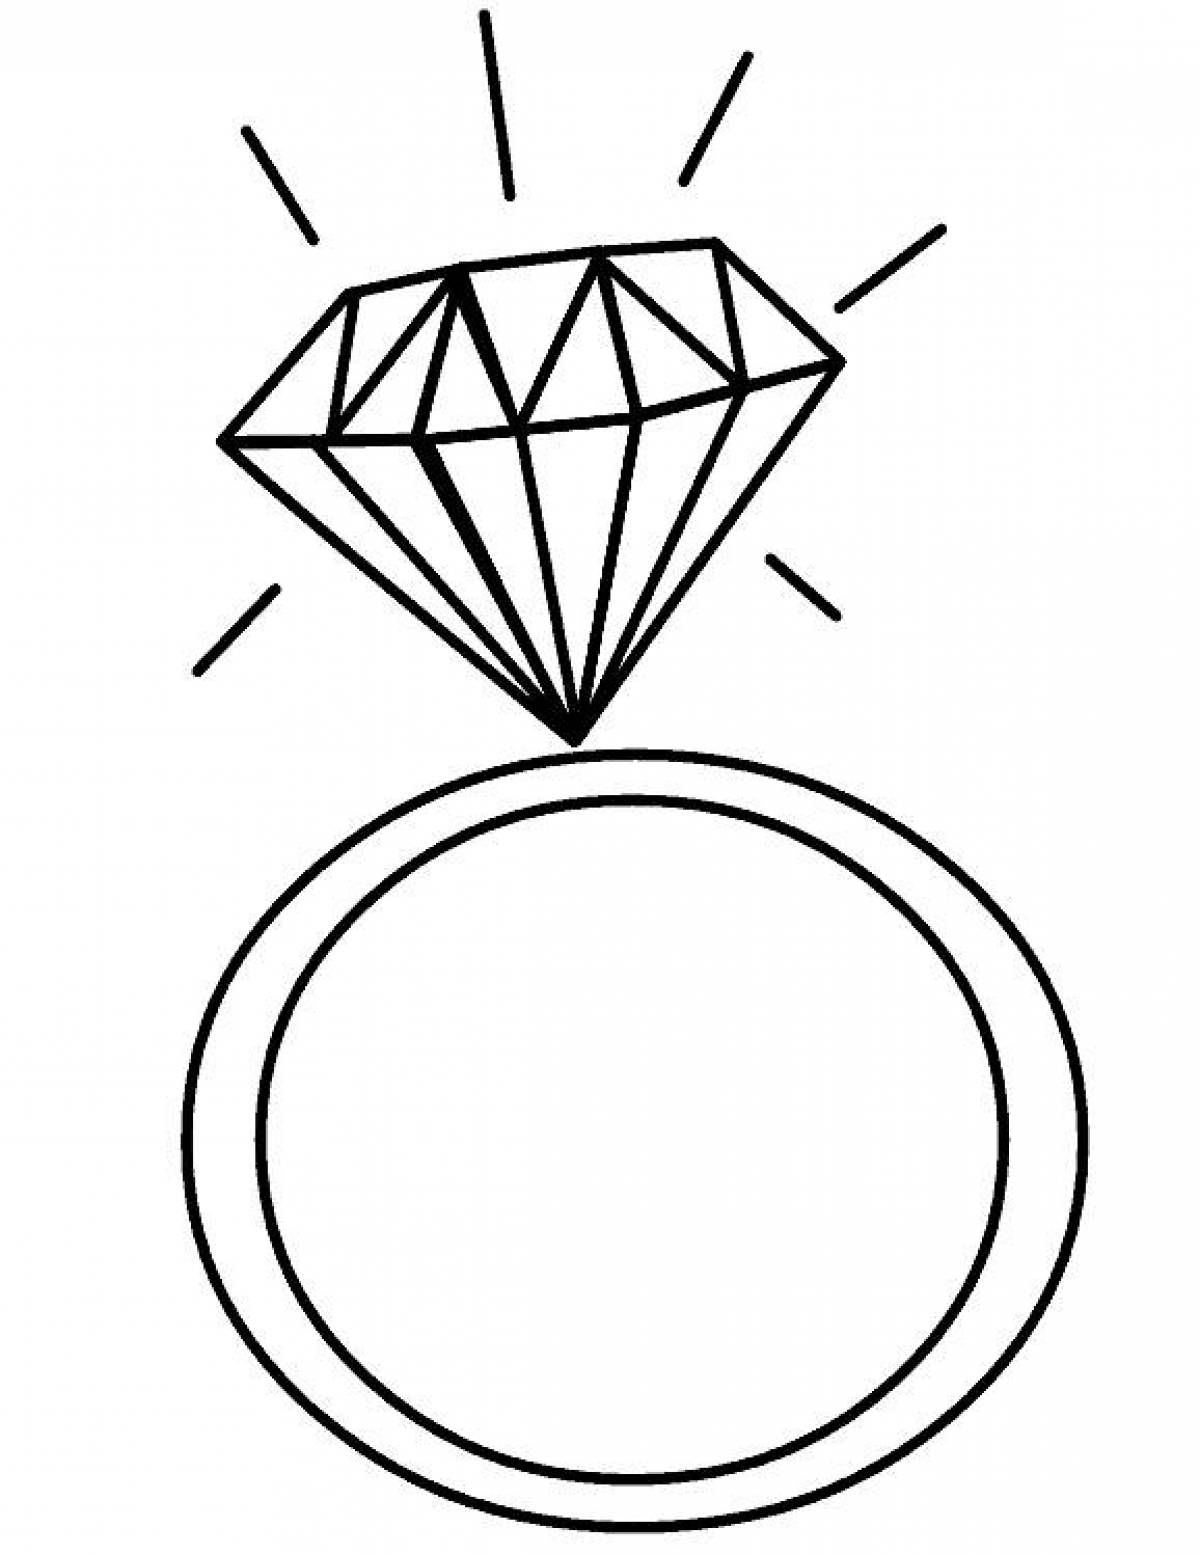 A ring with a diamond